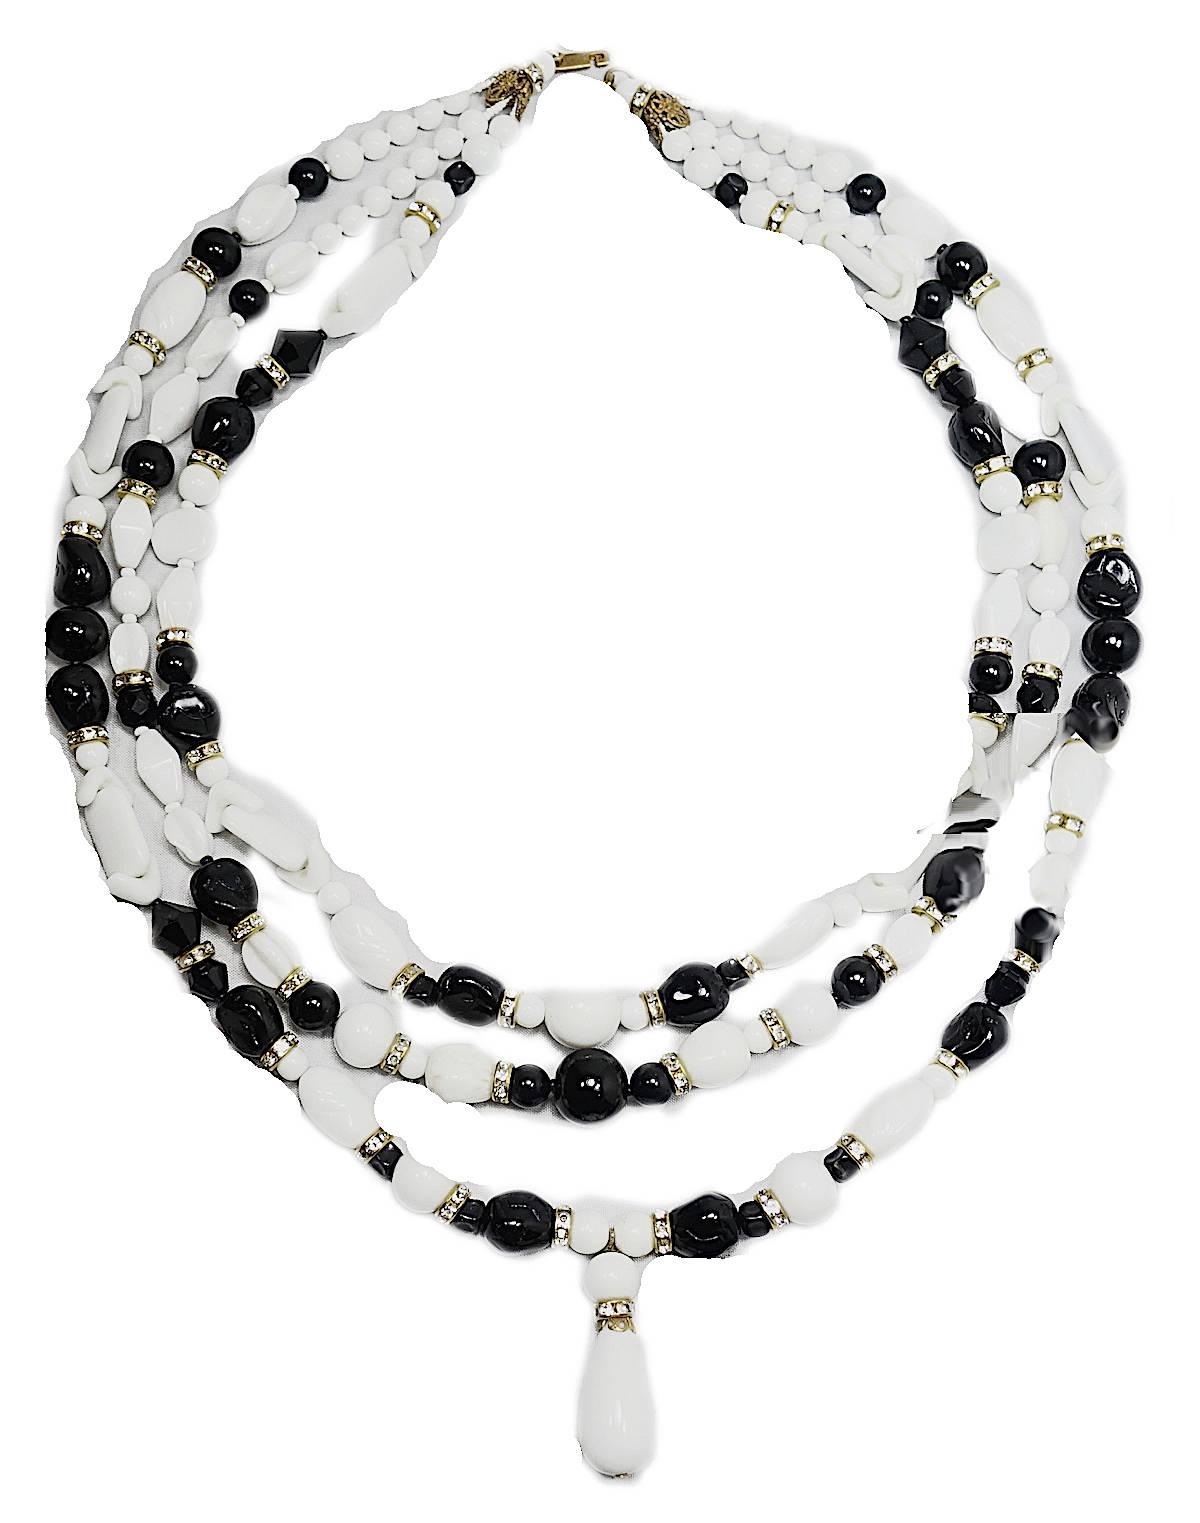 This Miriam Haskell necklace features black and white glass beads in a gold tone setting.  The longest strand is 25” x 1/2”; the shortest 20” x 1/2”. There is a teardrop shaped glass bead at the drop that measures 1-1/2” x 1/2”. This necklace is